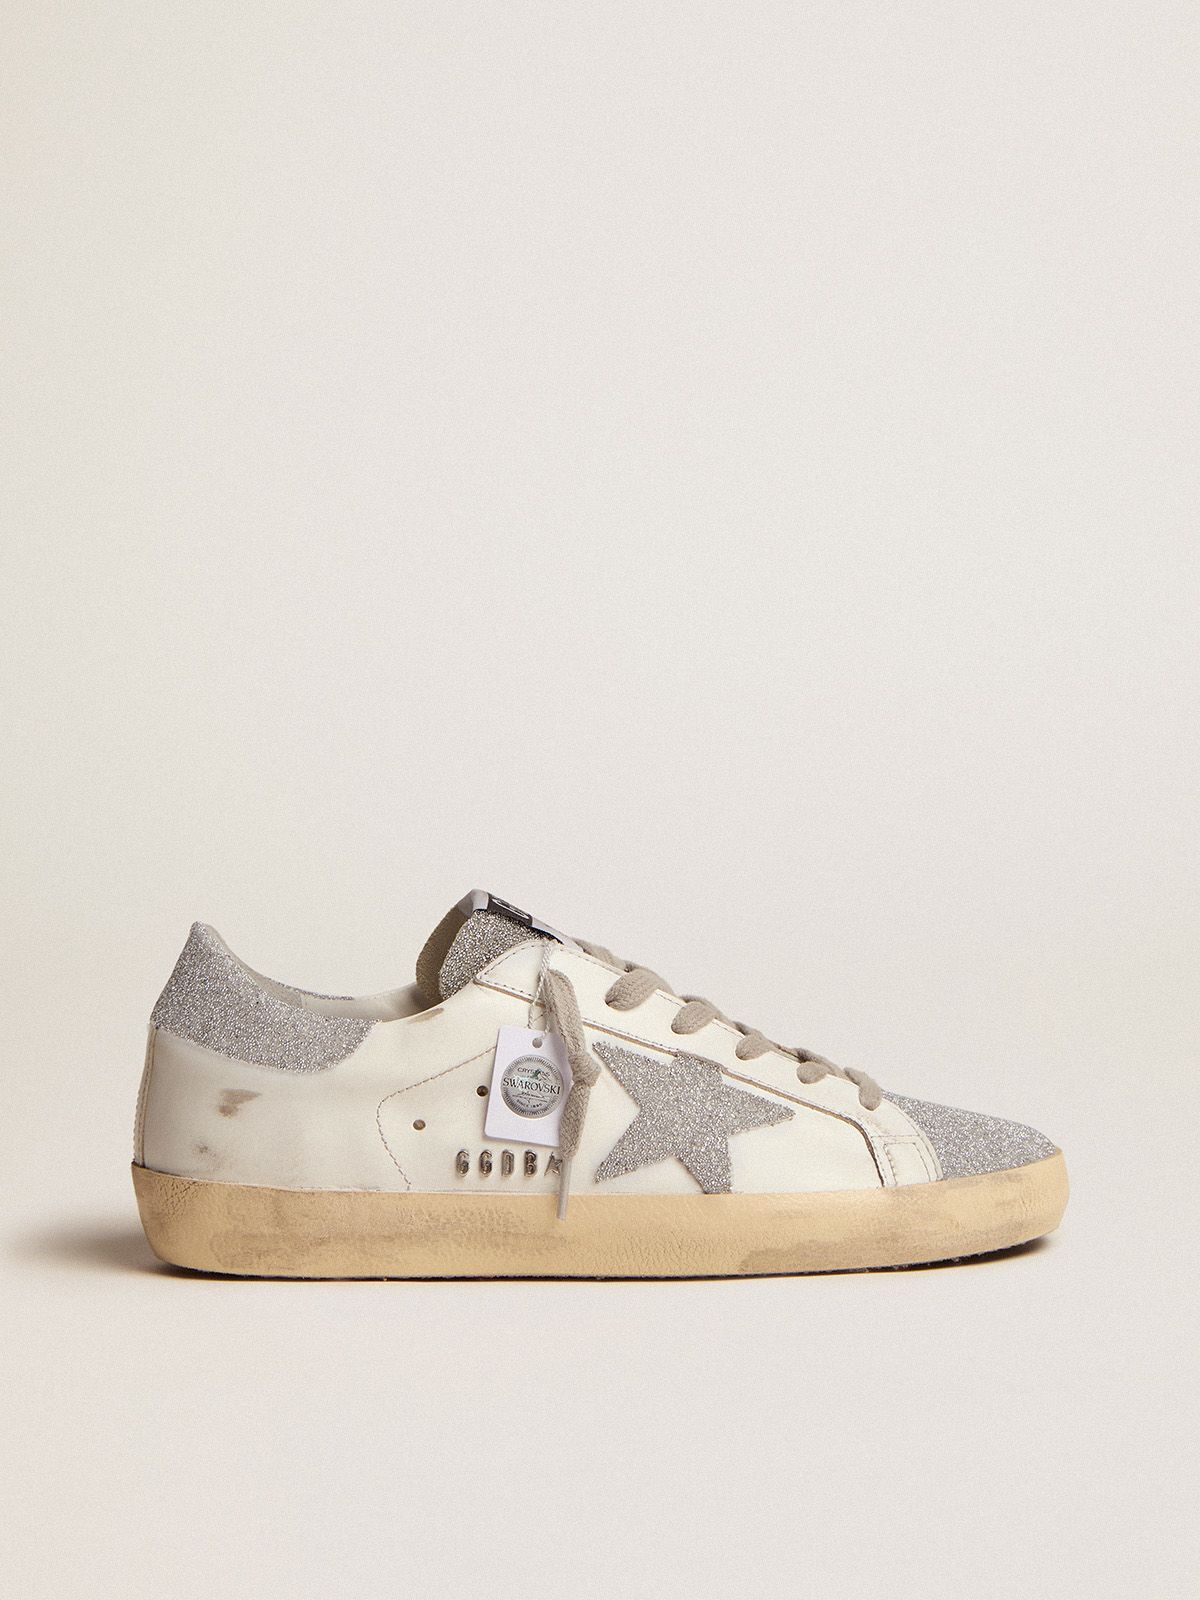 golden goose Super-Star and white crystal leather sneakers inserts upper Swarovski with